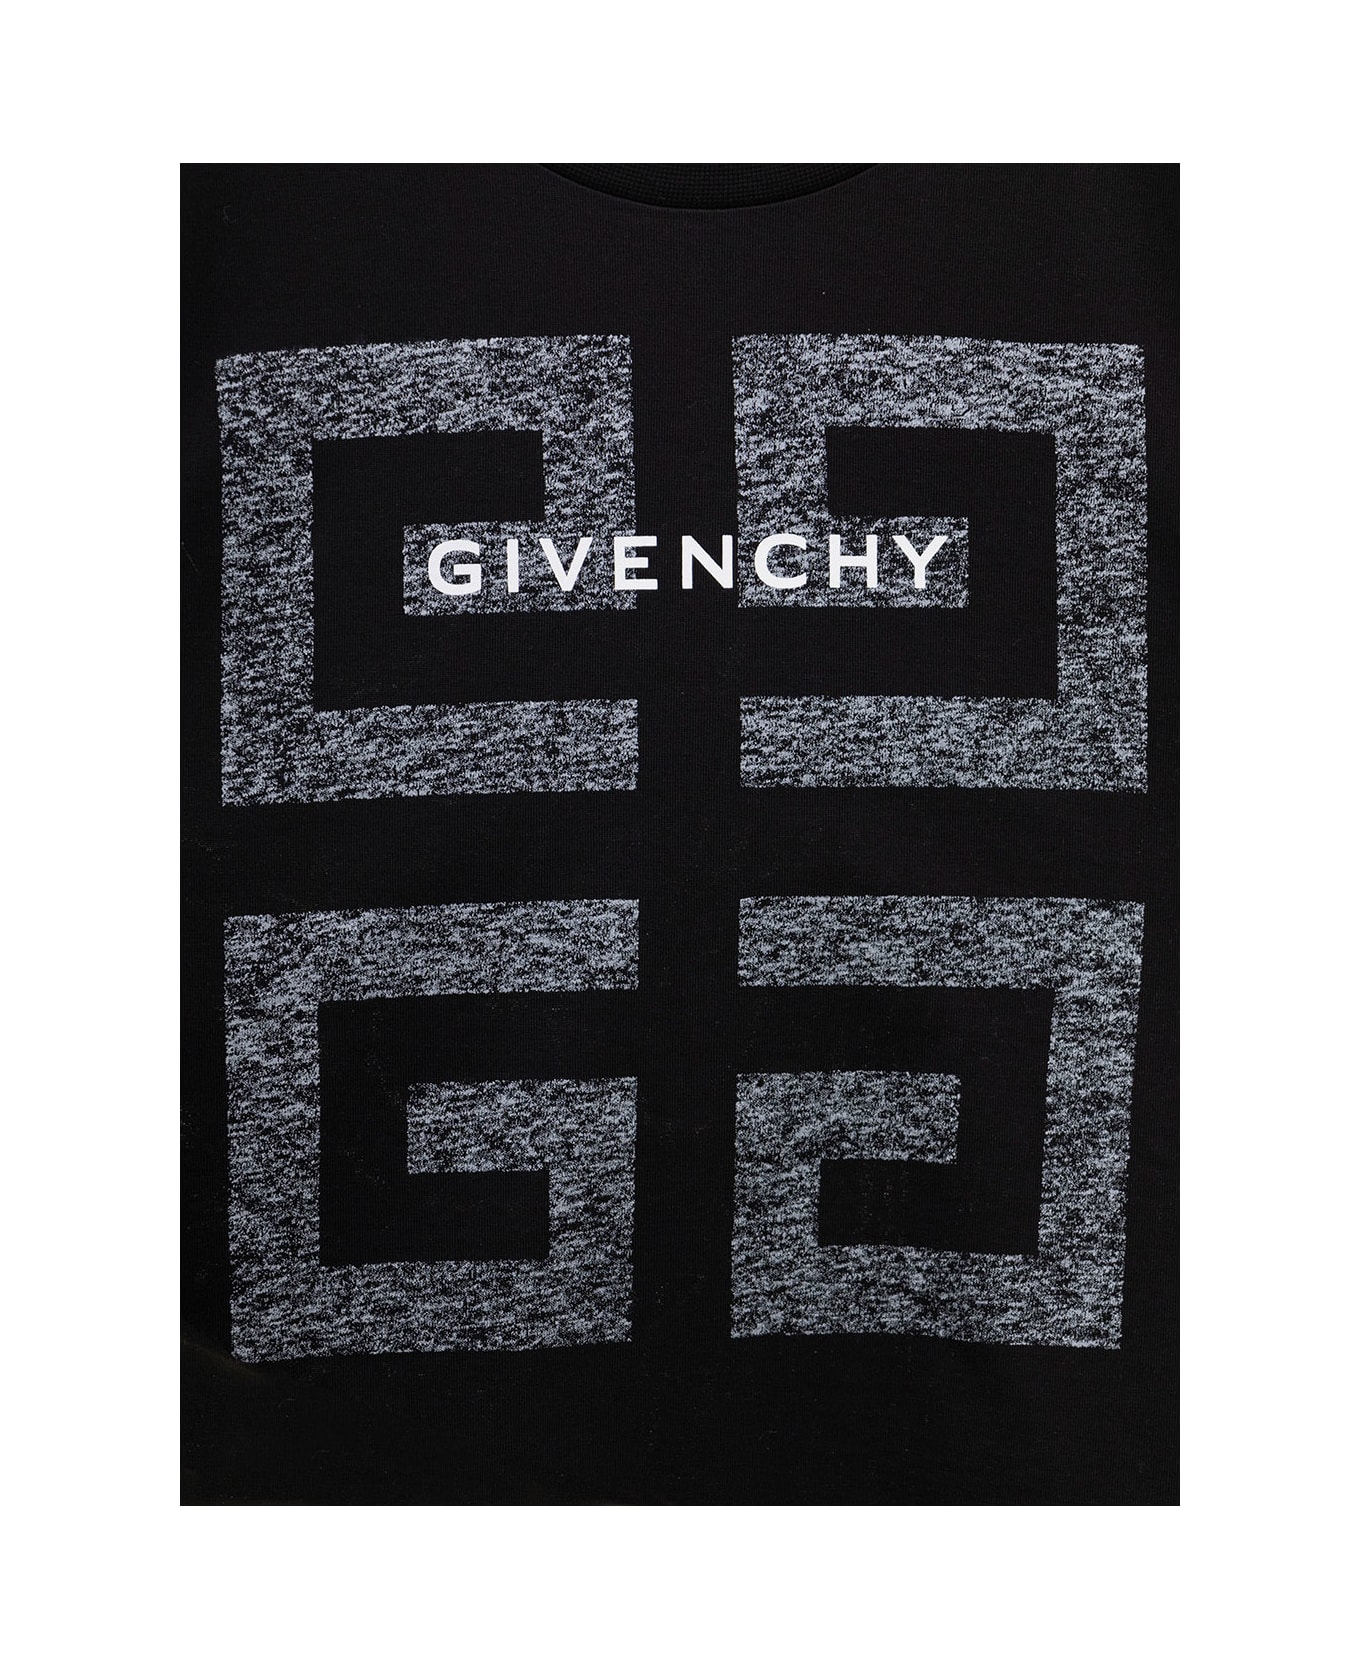 Givenchy Black Cotton Long Sleeved T-shirt With 4g Print Givenchy Kids Boy - Black